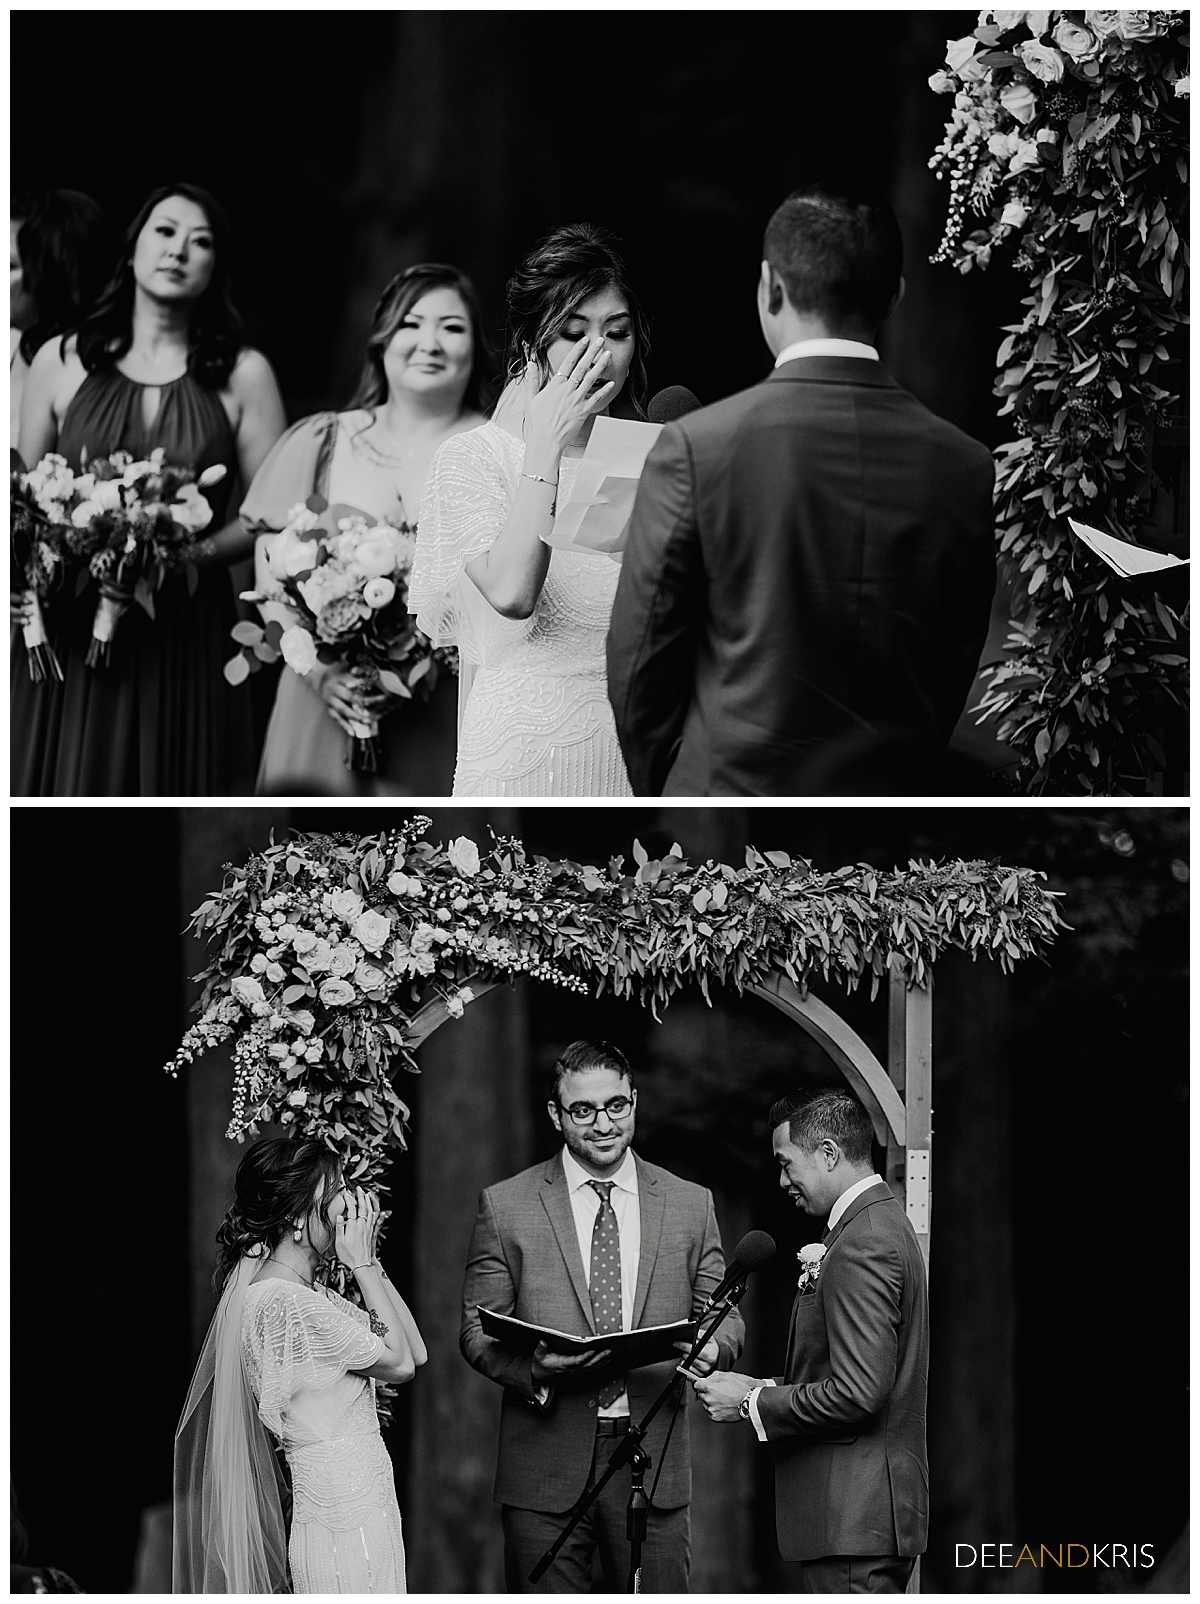 Two black and white images: top image of bride reading her vows as she wipes away tears. Bottom image of groom reading vows as bride laughs.